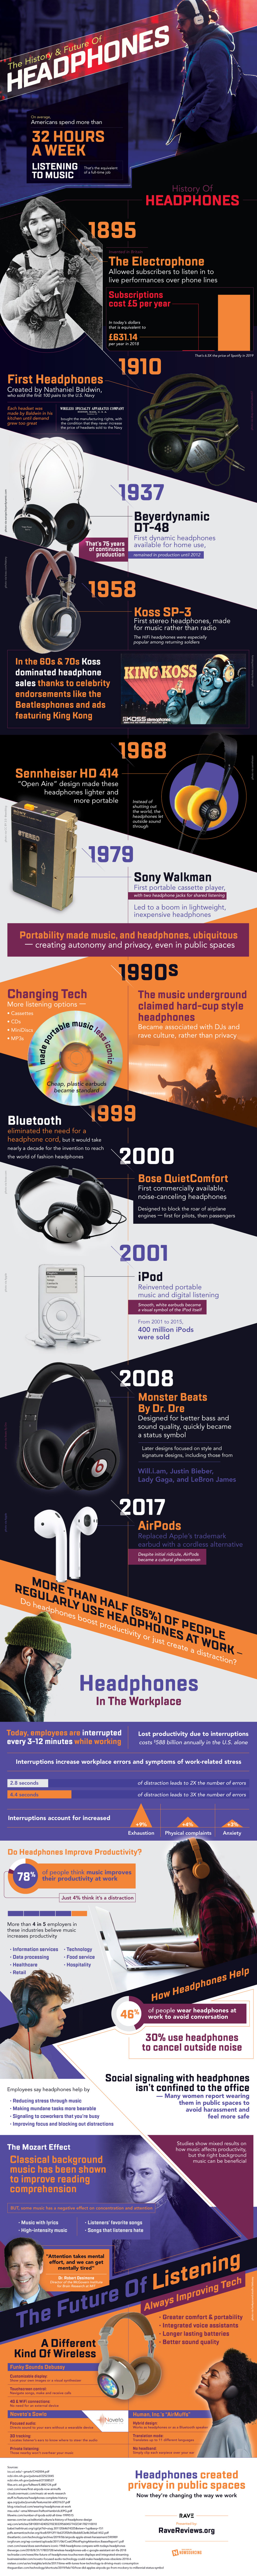 The History and Future of Headphones